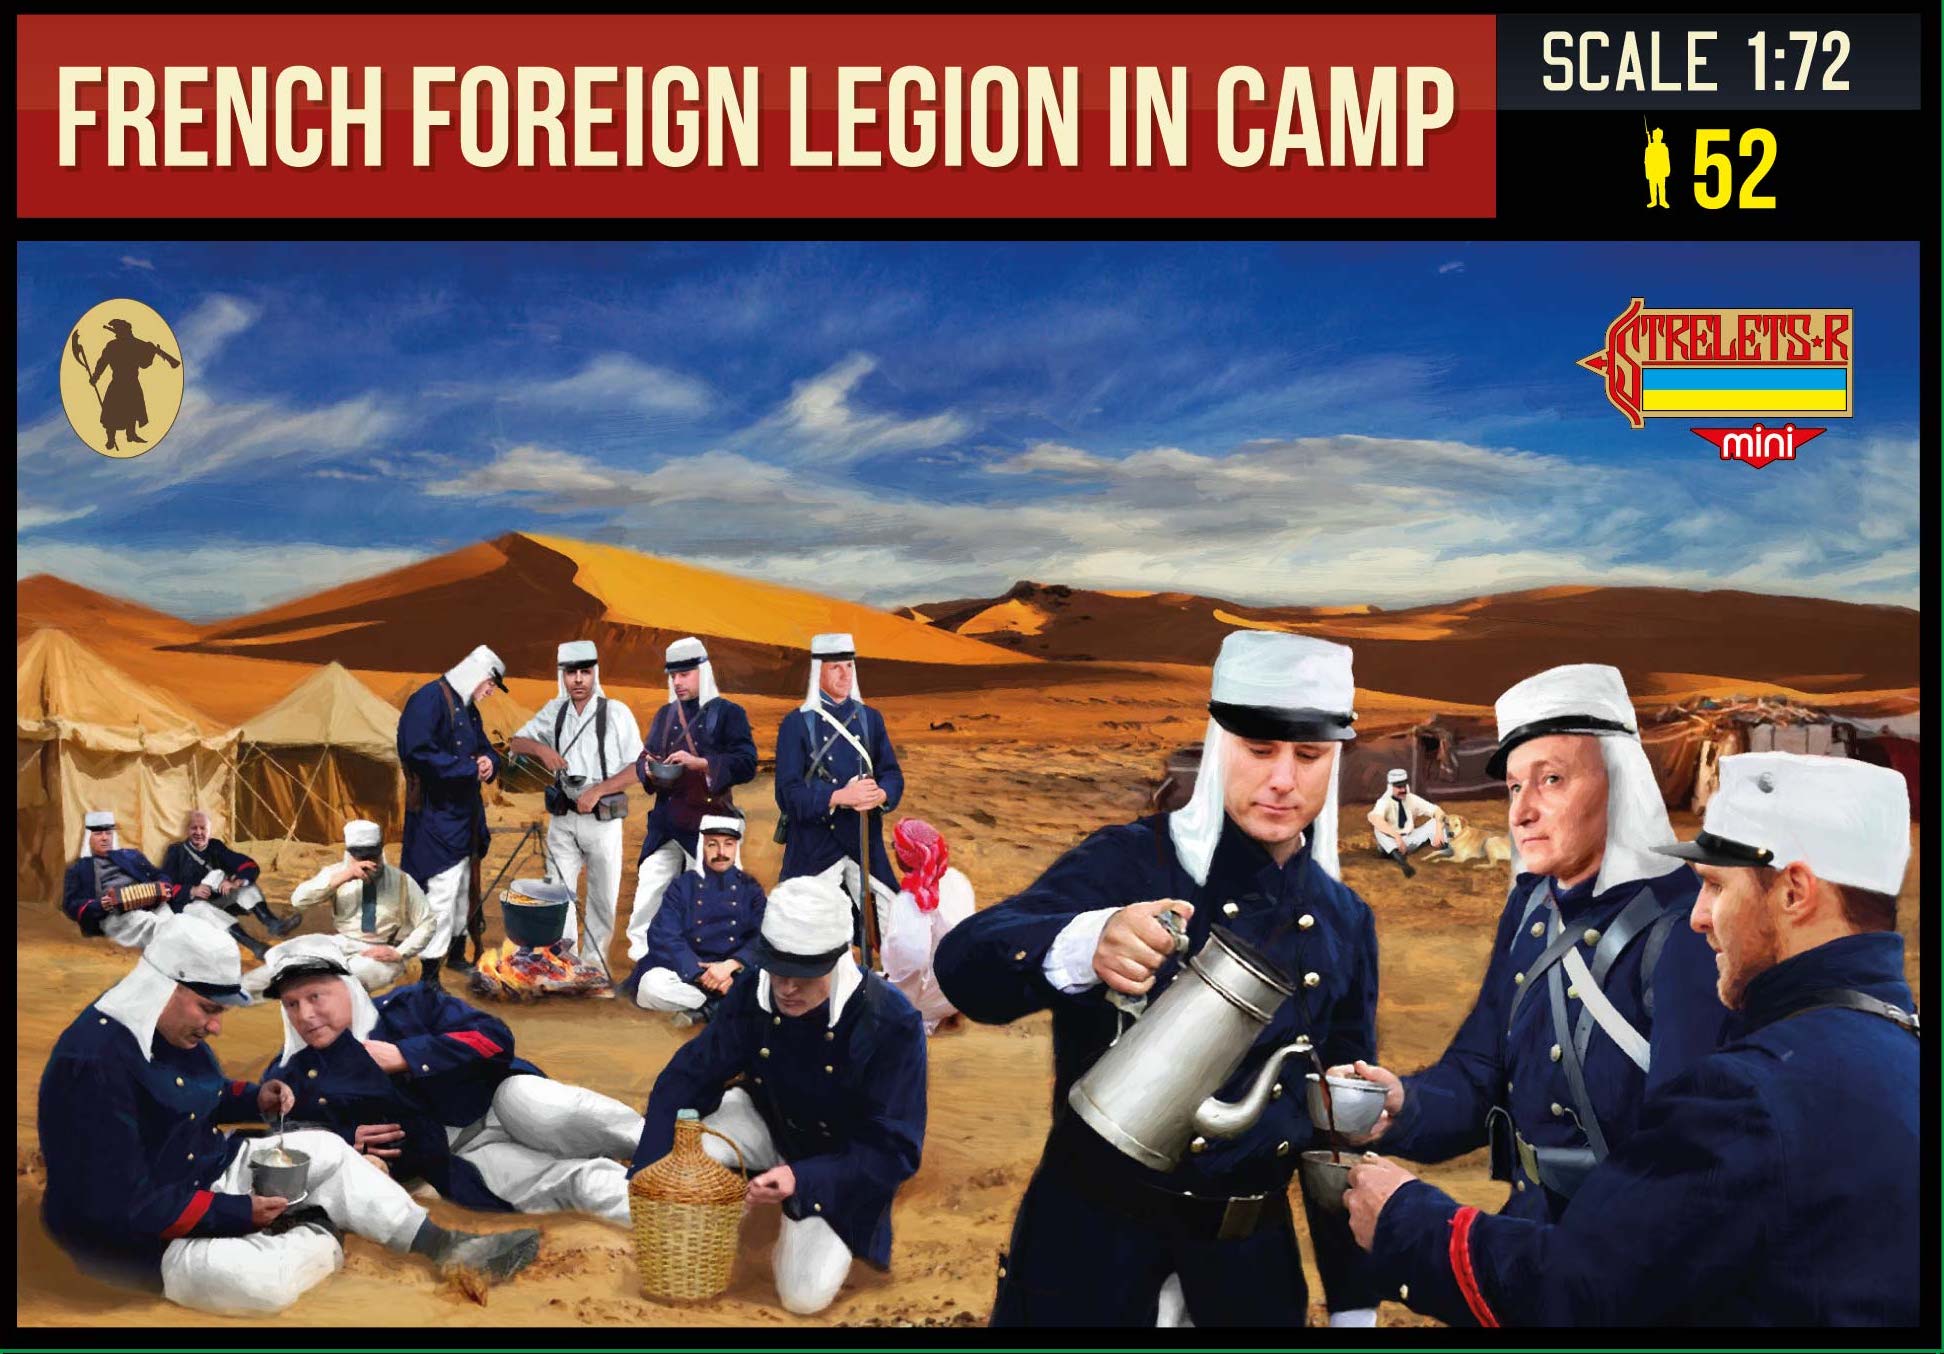 Rif Wr French Foreign Legion in Camp